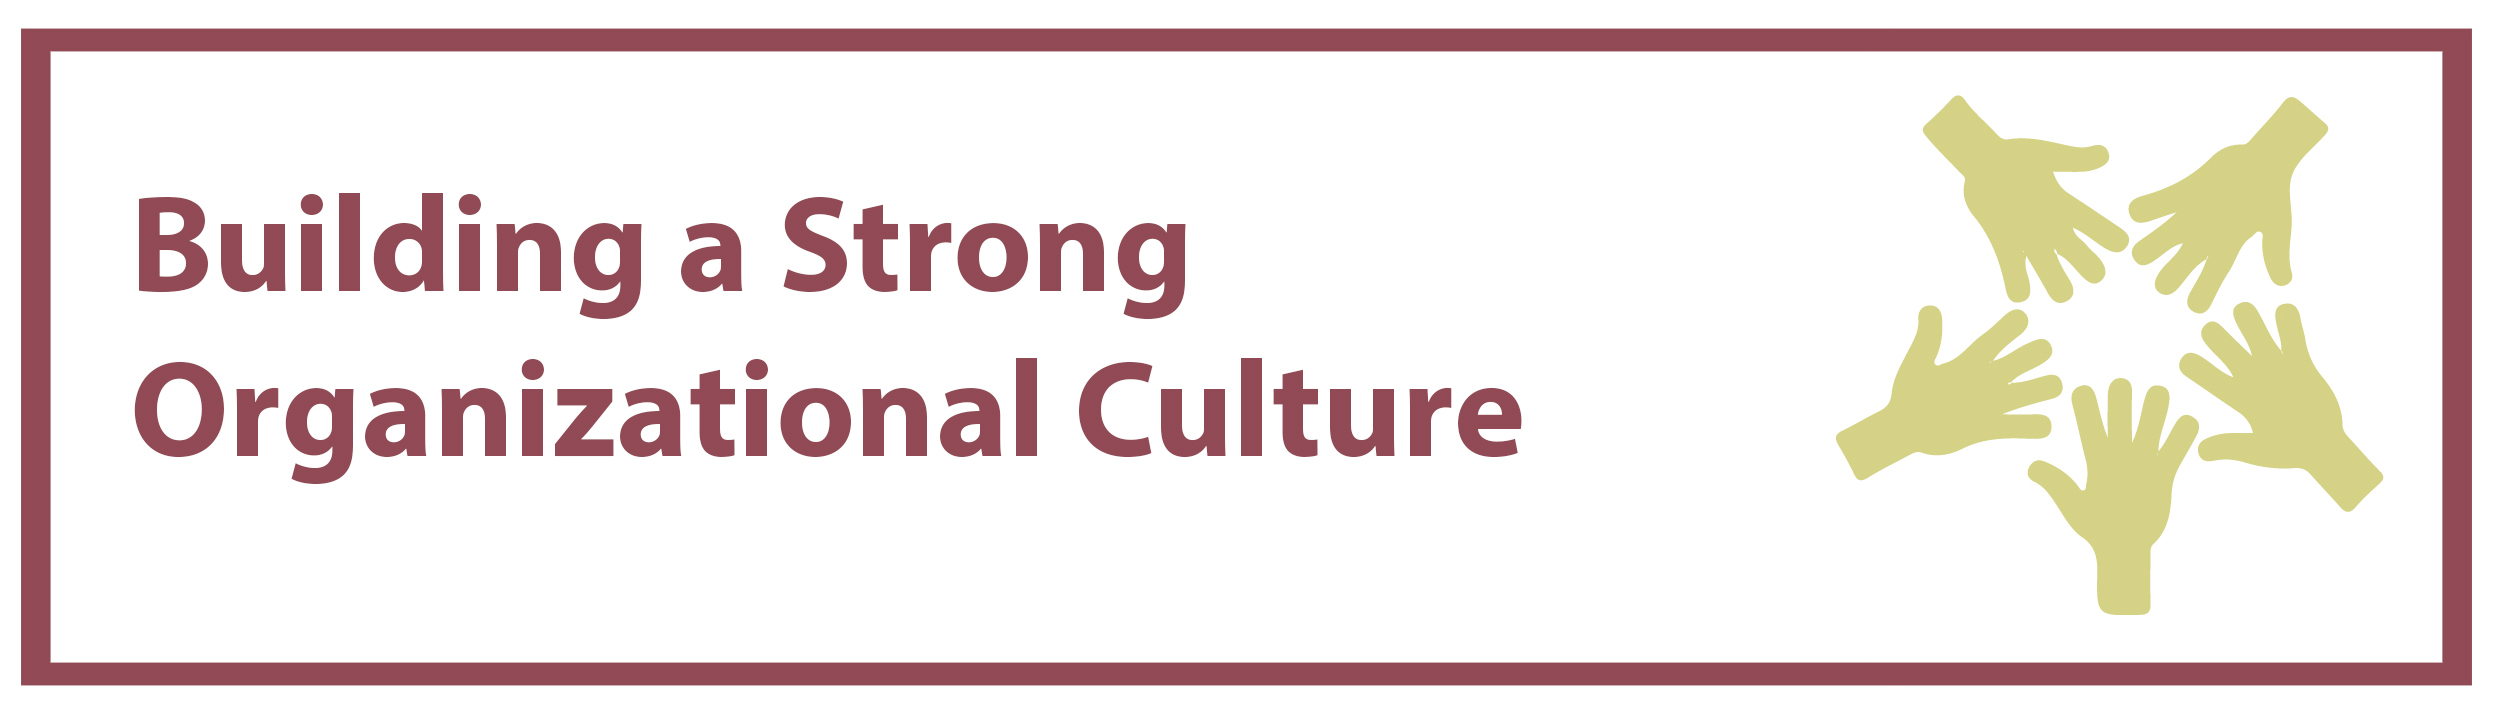 Building a Strong Organizational Culture